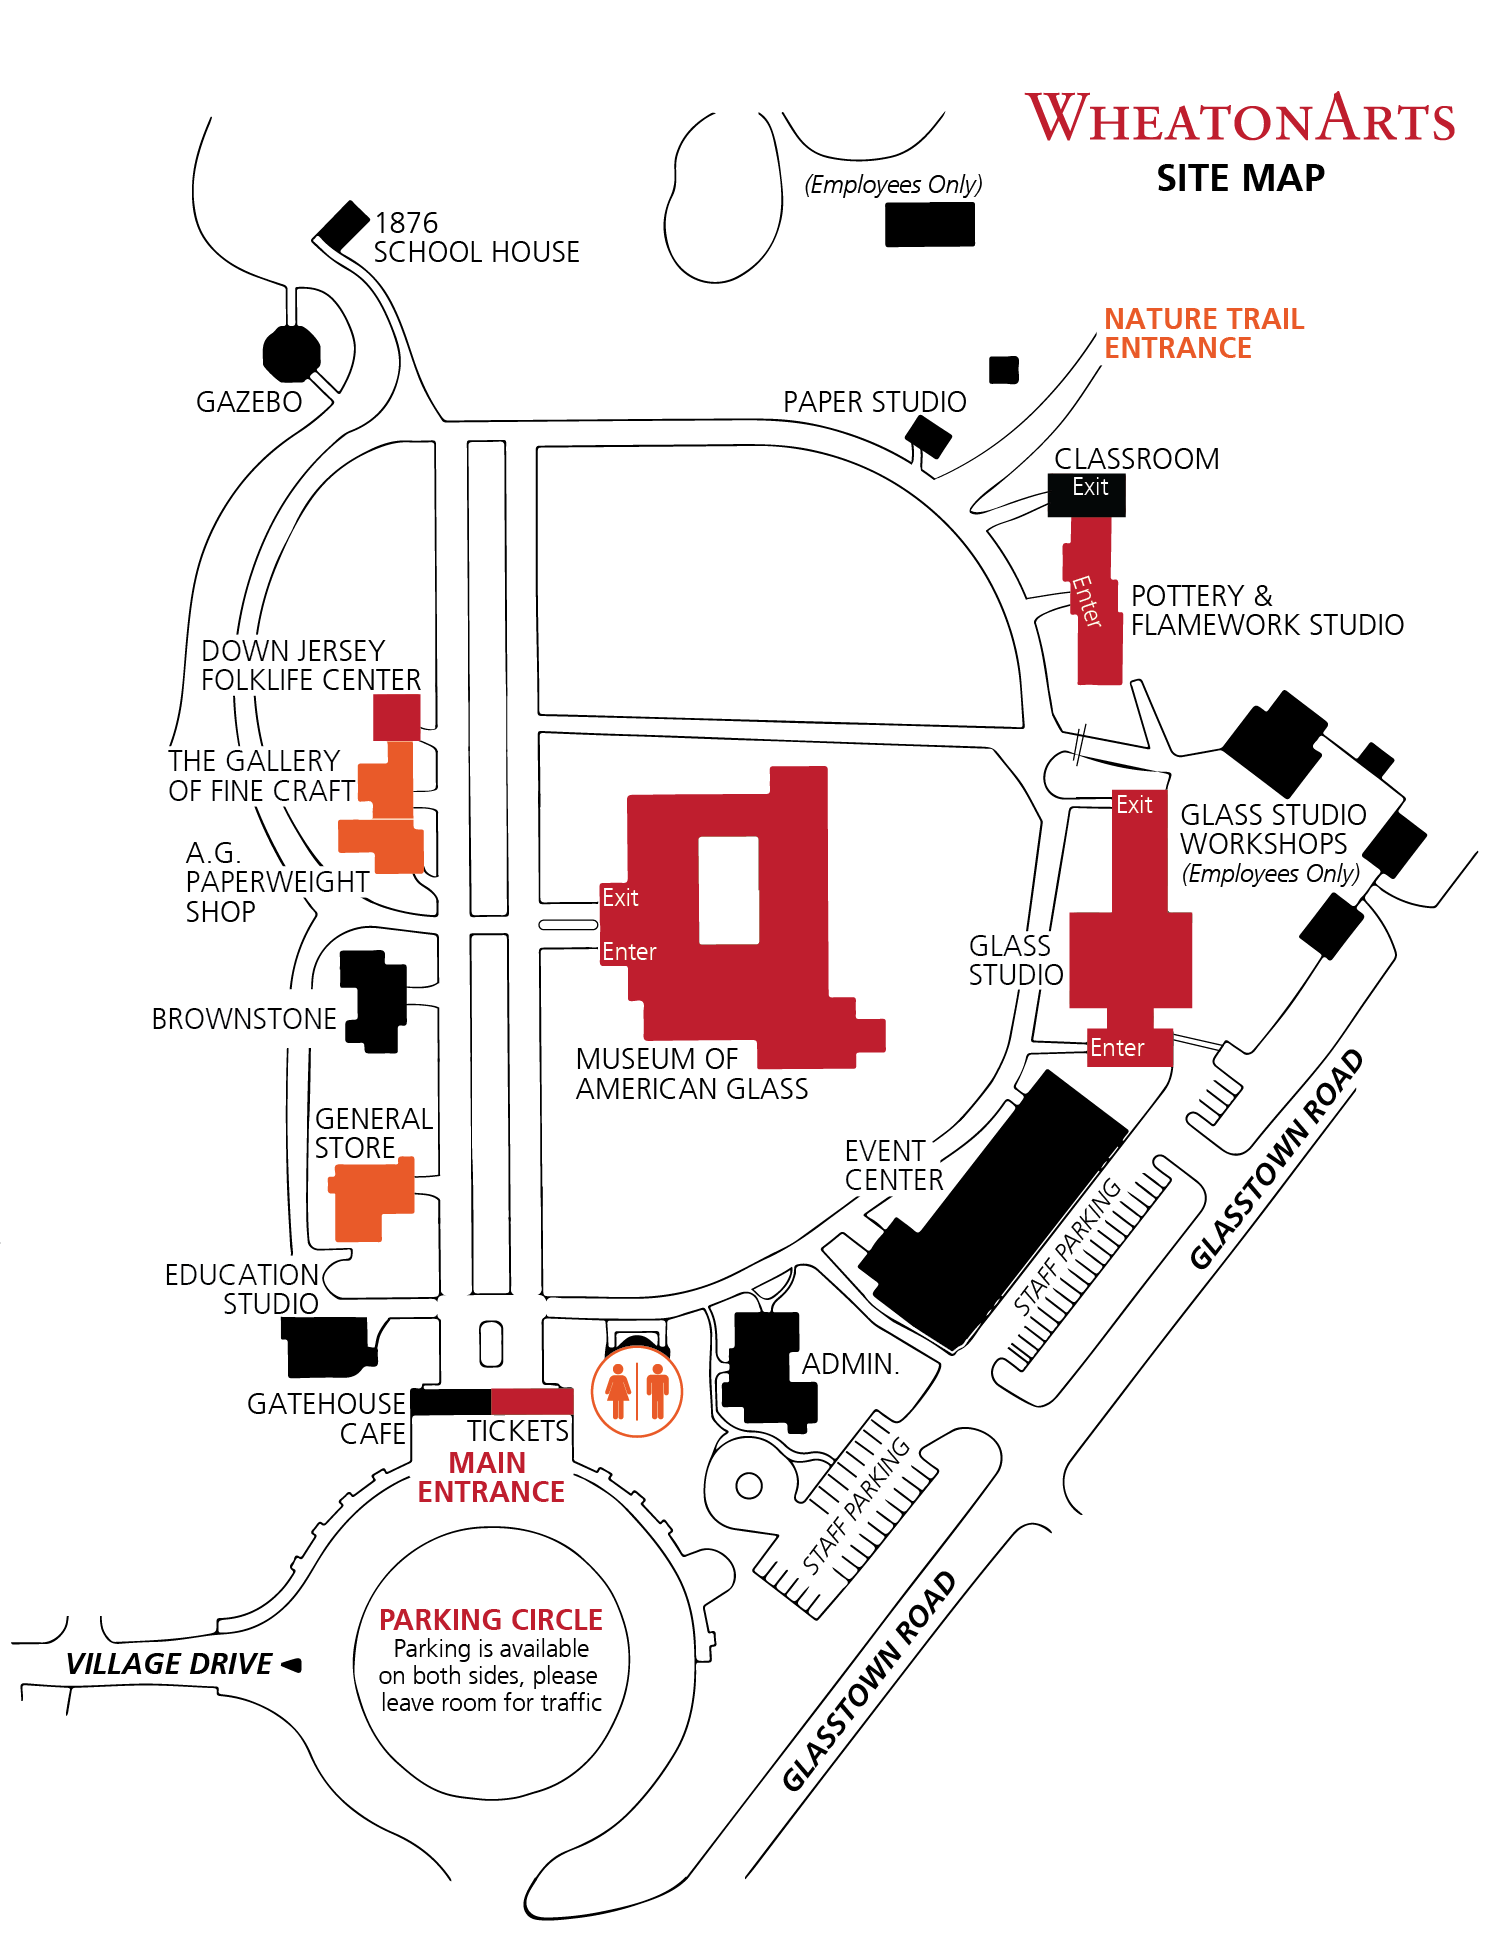 WheatonArts Site Map showing the layout of the campus. In a circle from the Main Gate (heading clockwise): GateHouse Cafe, Education Studio, General Store, Brownstone, AG Paperweight Shop, The Gallery of Fine Craft, Down Jersey Folklife Center, Gazebo and 1876 School House, Paper Studio, Nature Trail entrance, classroom, Pottery & Flamework Studio, Glass Studio, Event Studio, Admin Building, public restroom, and then the Museum of American Glass is at the center of the campus.